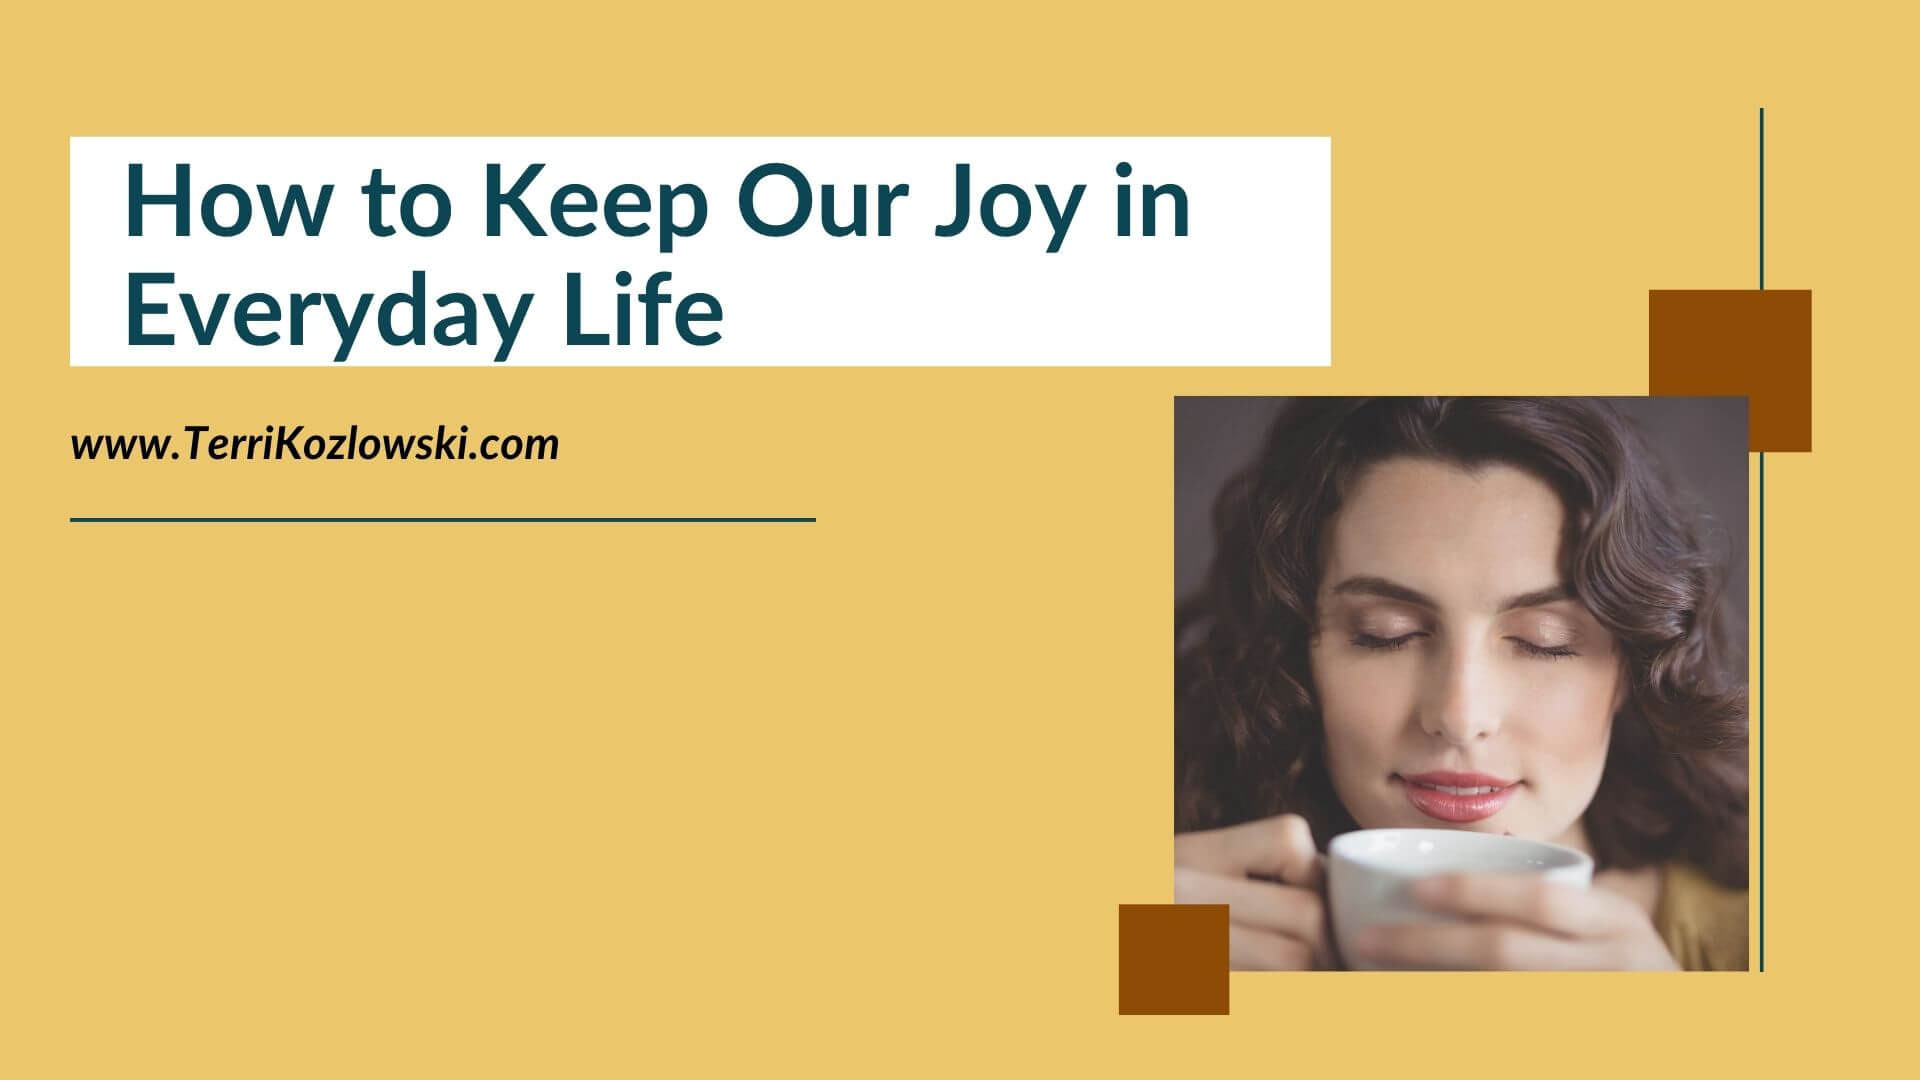 How to Keep Our Joy in Everyday Life